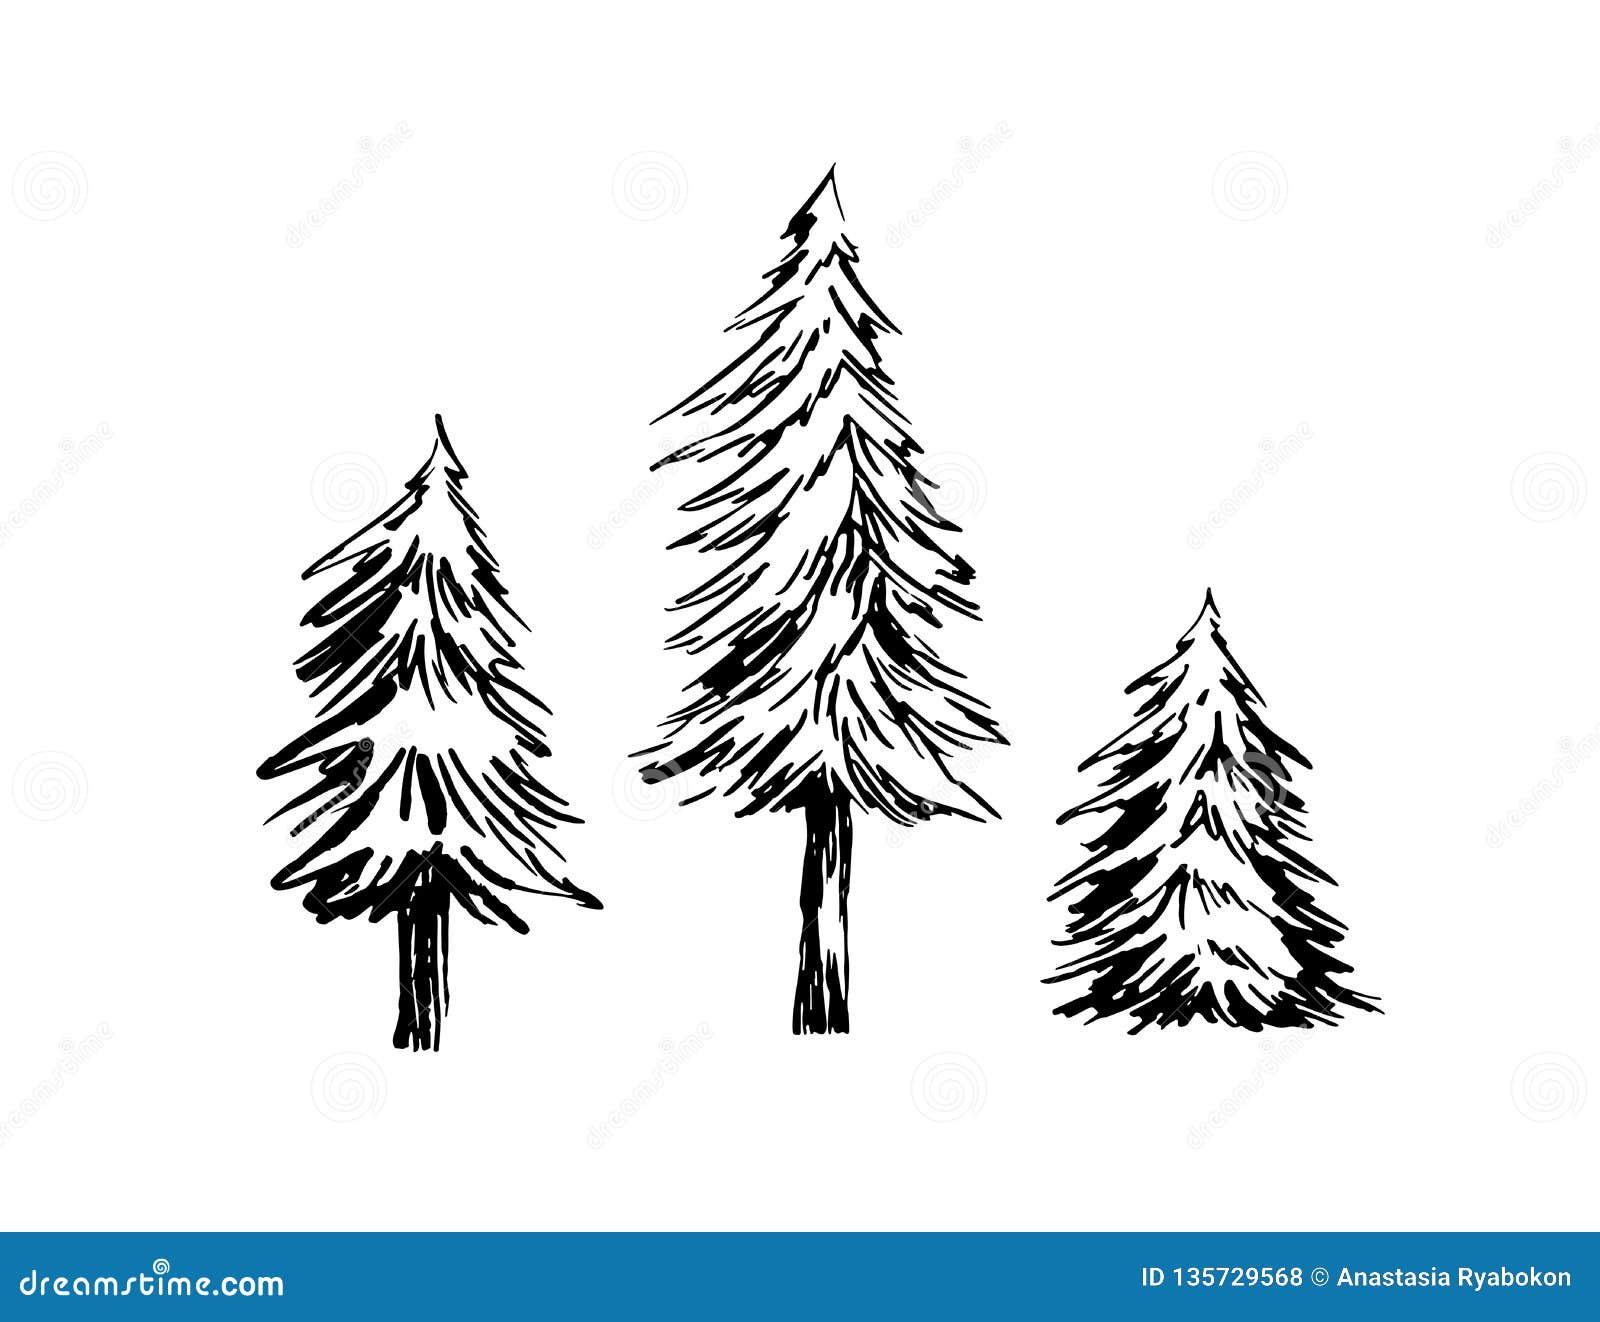 Fir Trees Ink Sketches Set Vector Stock Vector - Illustration of trees